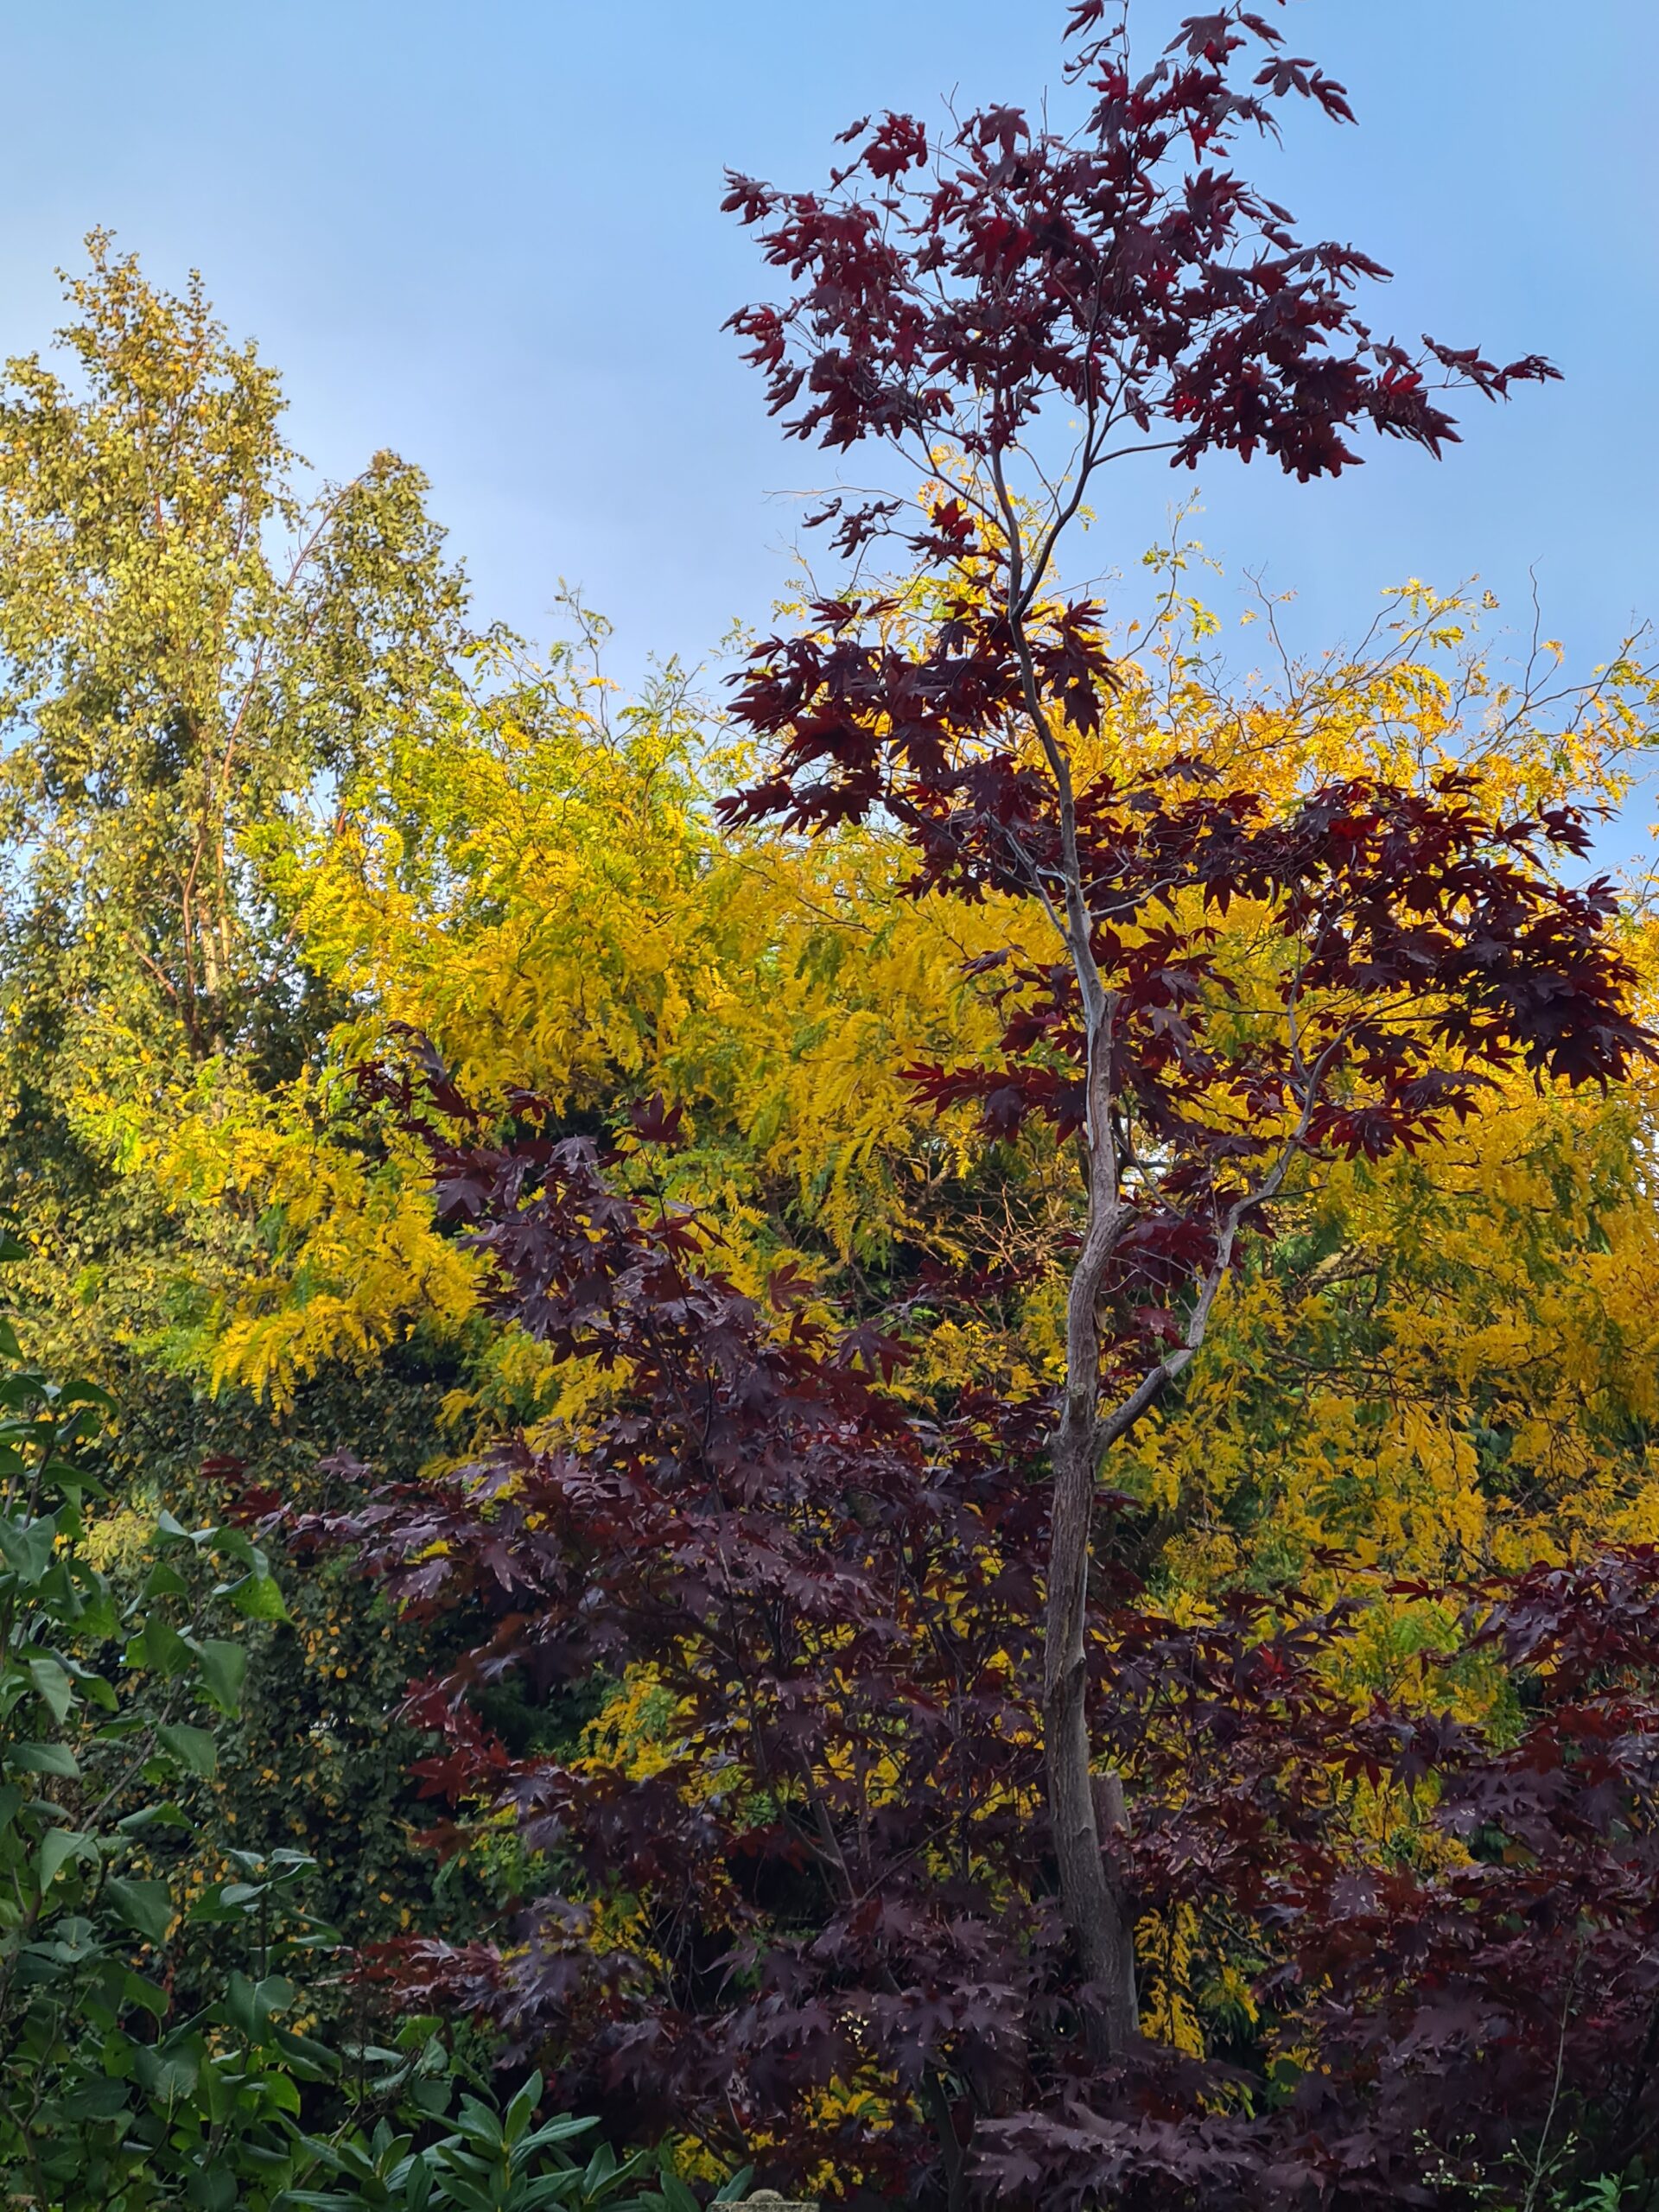 Leaves turning from green to yellow in the background and in the foreground a purple Japanese maple tree.